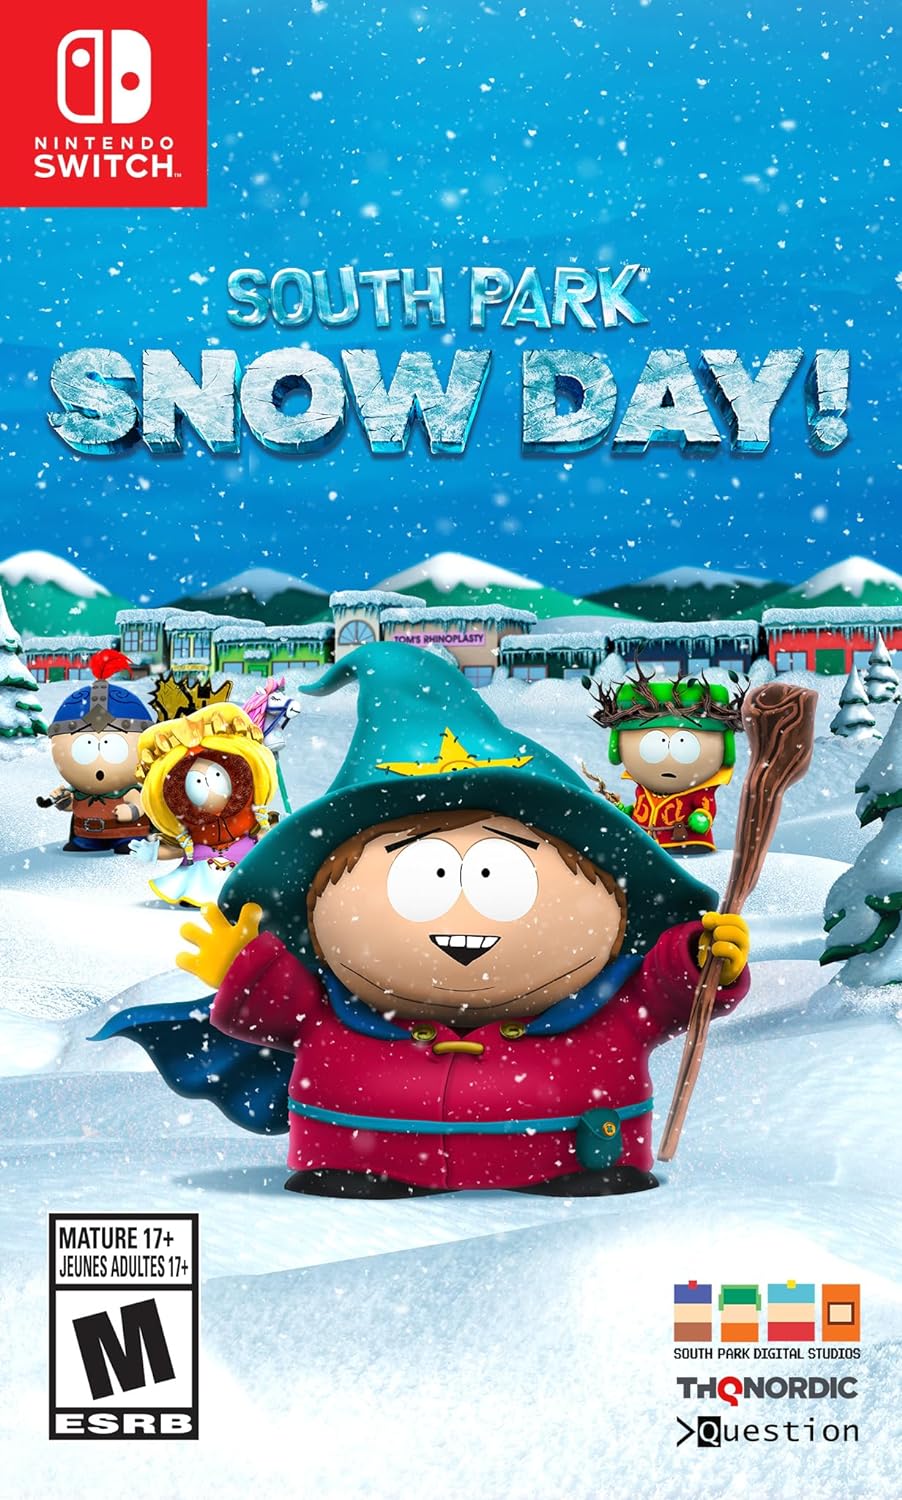 Nintendo Switch - South Park: Snow Day [NEW]